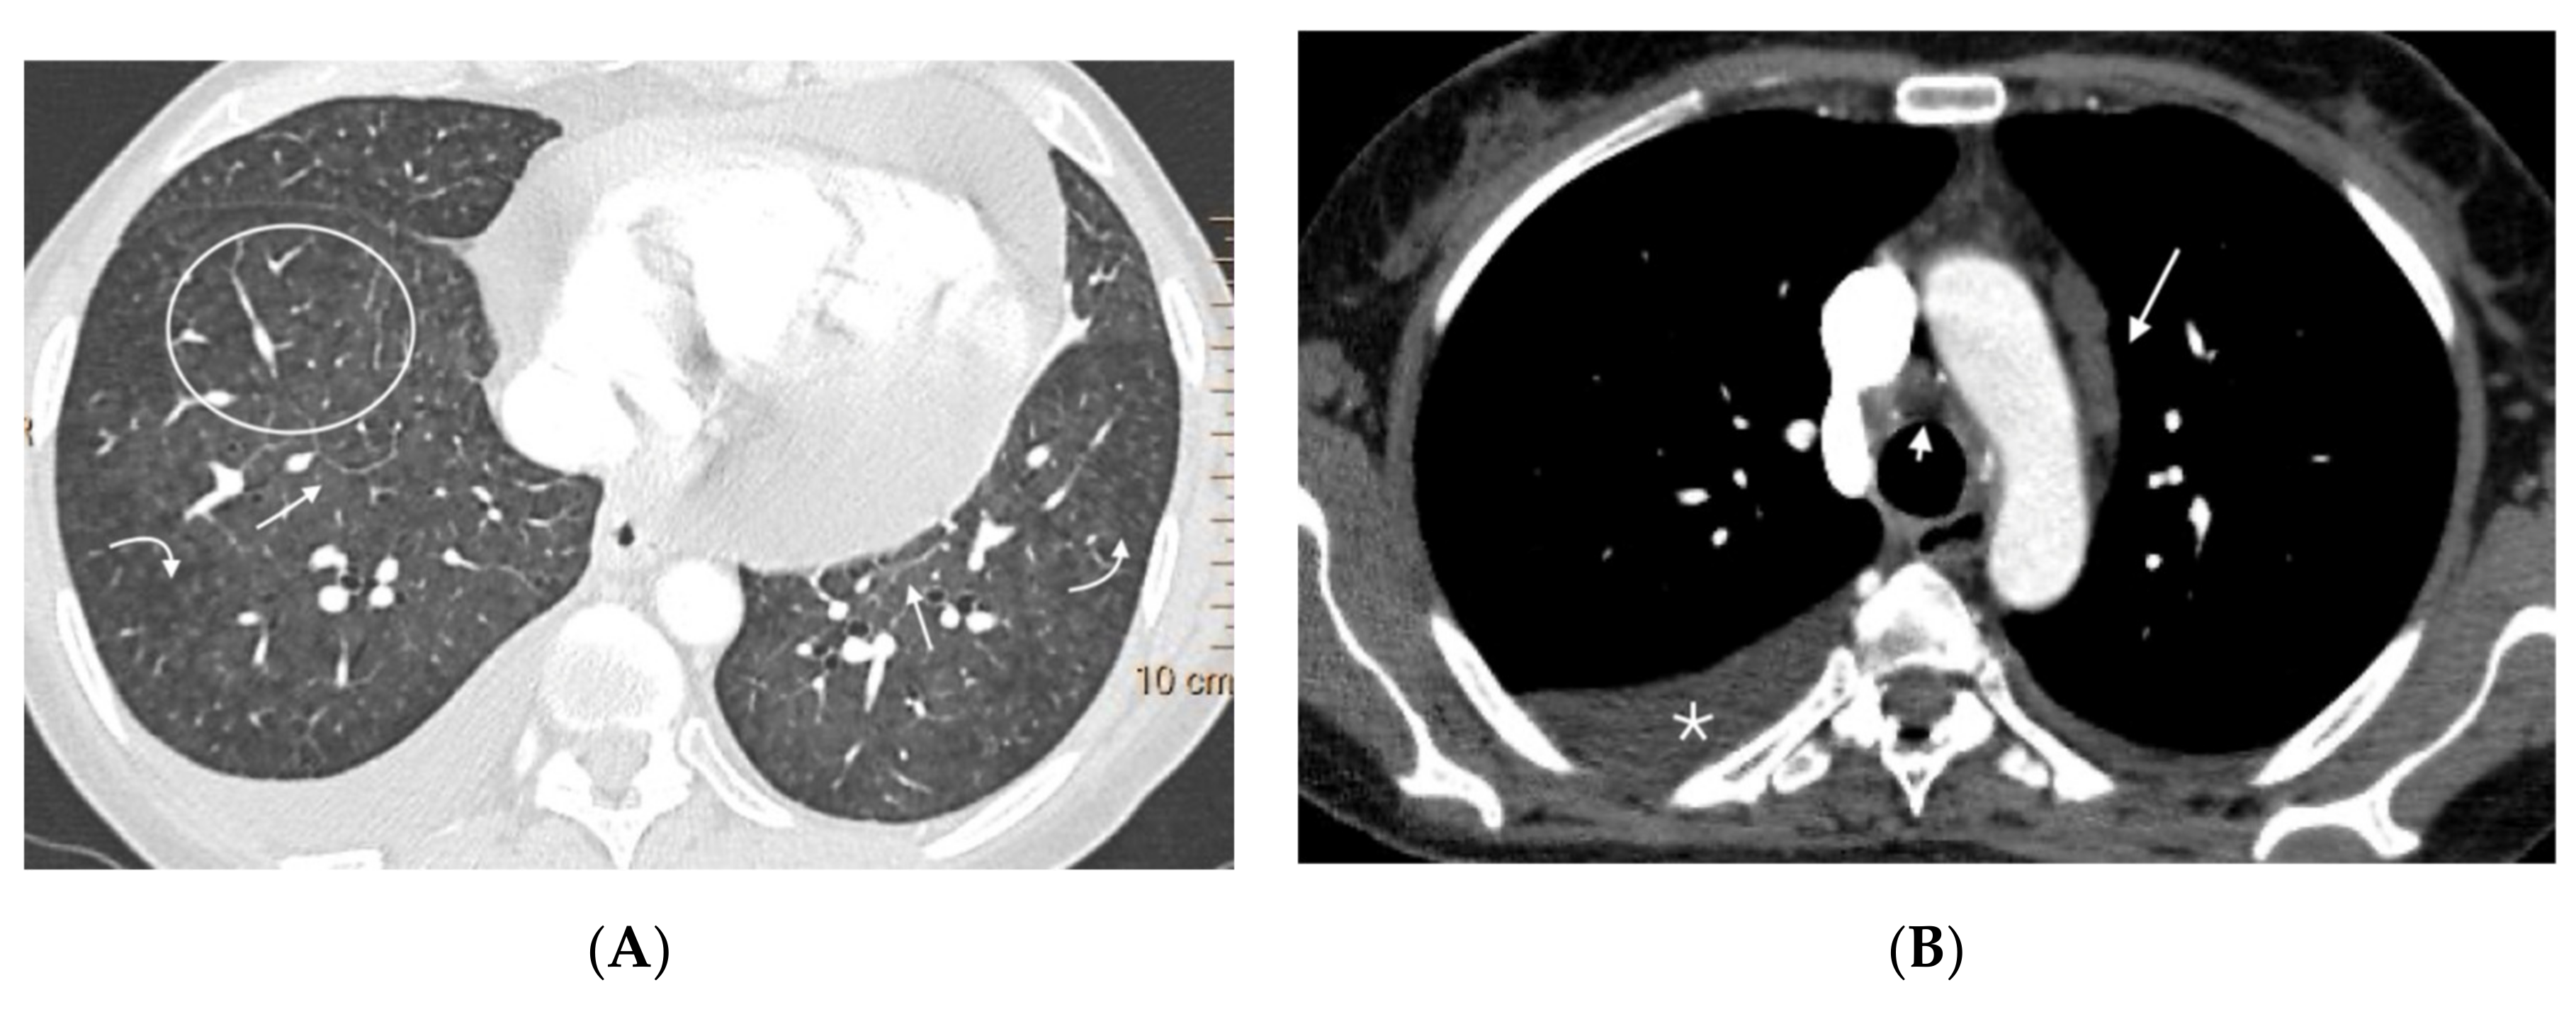 Diagnostics Free Full-Text Radiological Findings in Multidetector Computed Tomography (MDCT) of Hereditary and Sporadic Pulmonary Veno-Occlusive Disease Certainties and Uncertainties